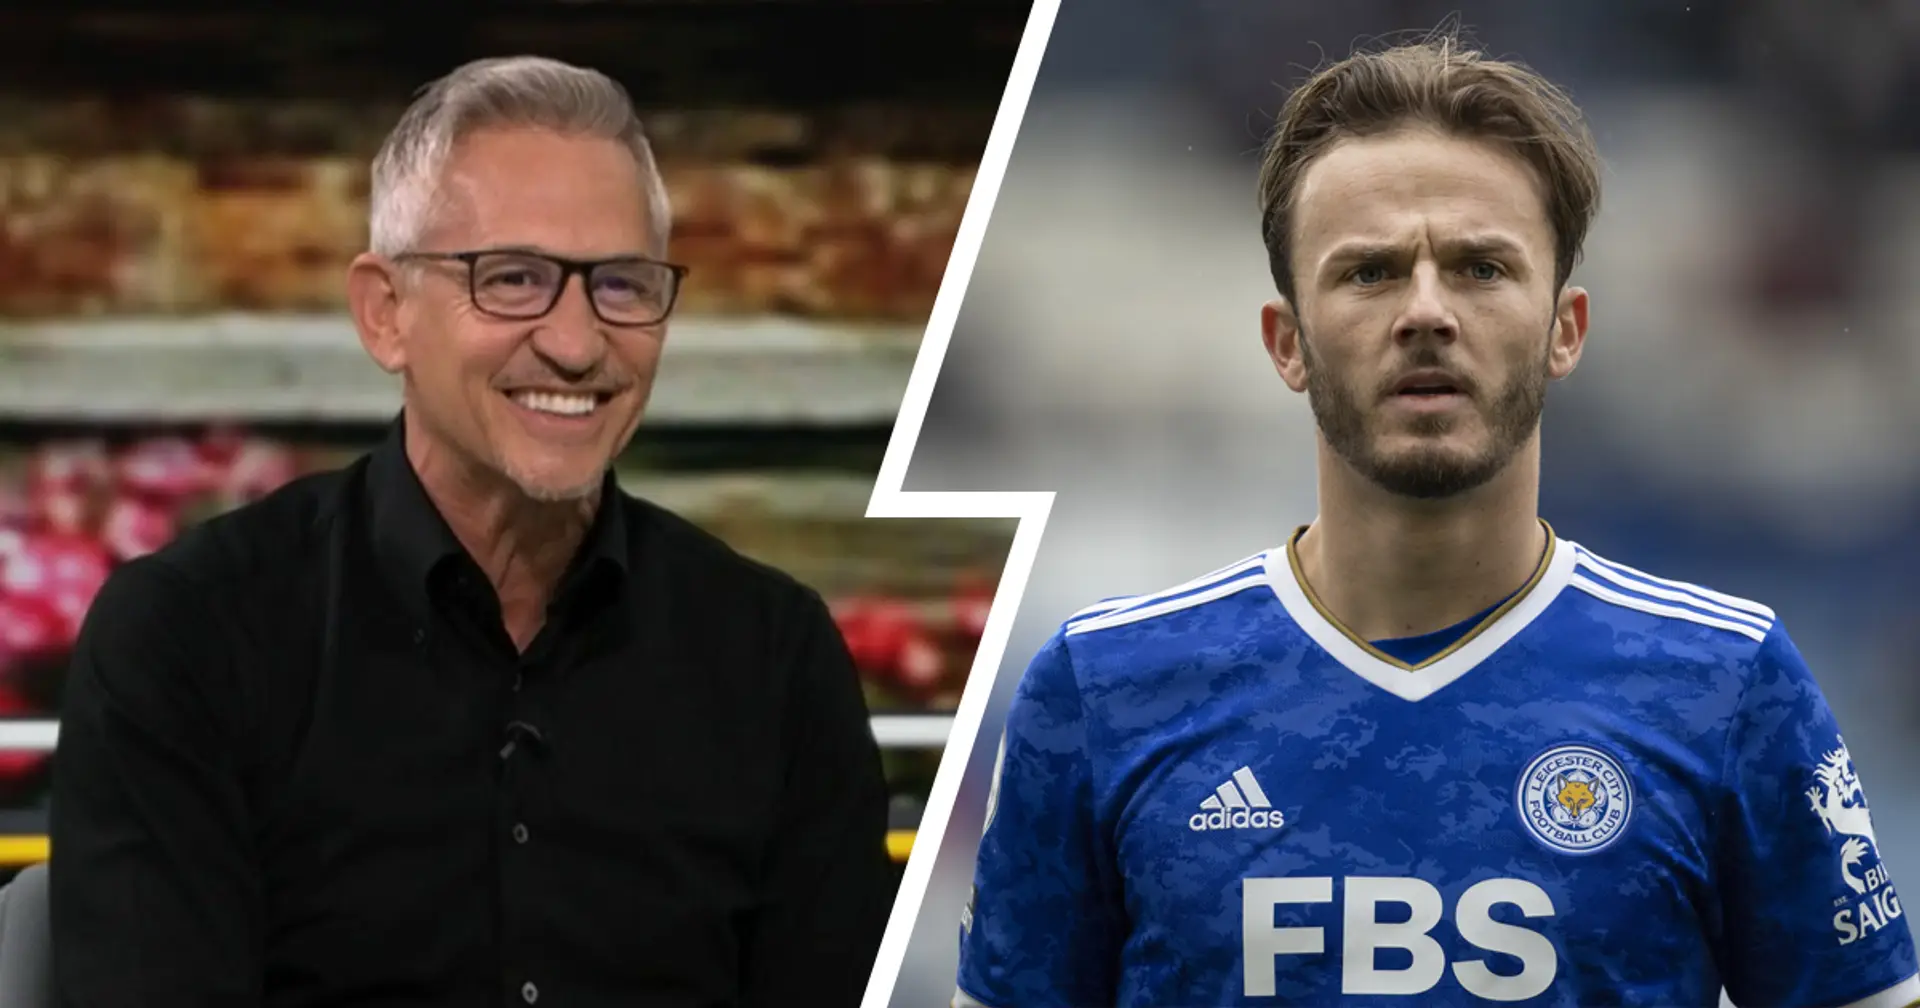 Gary Lineker makes fun of Arsenal as he reacts to James Maddison rumours